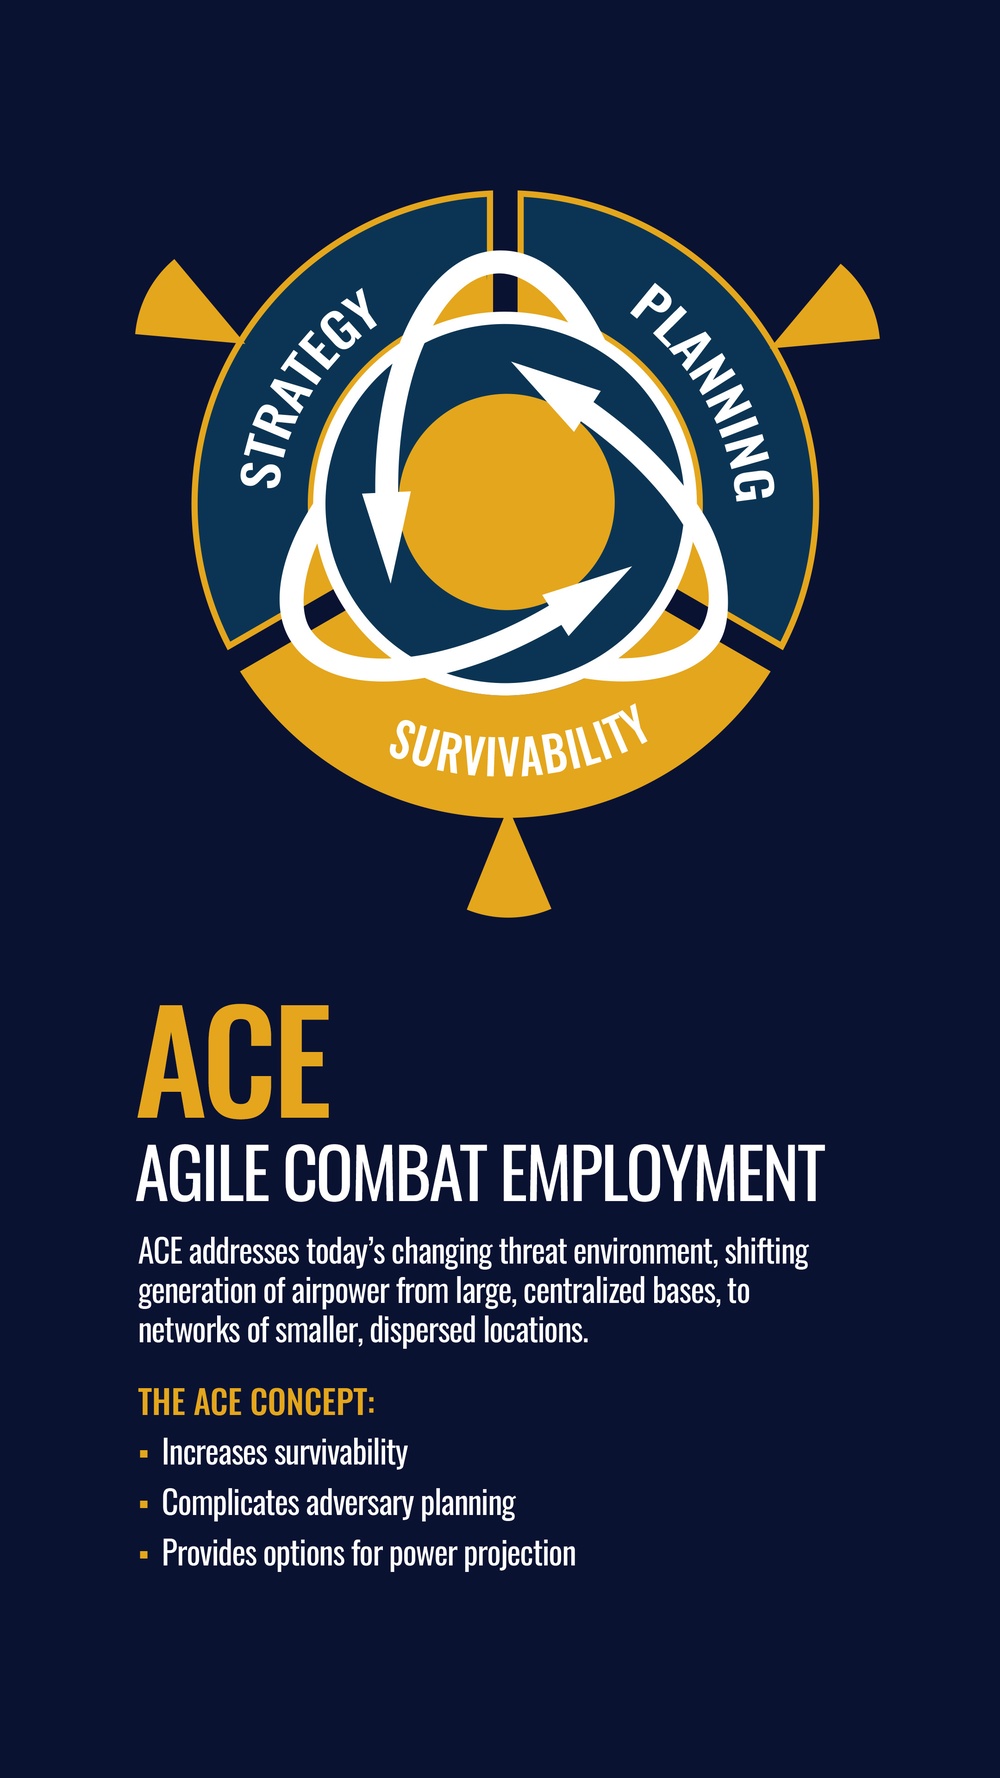 Drivers For Change: ACE